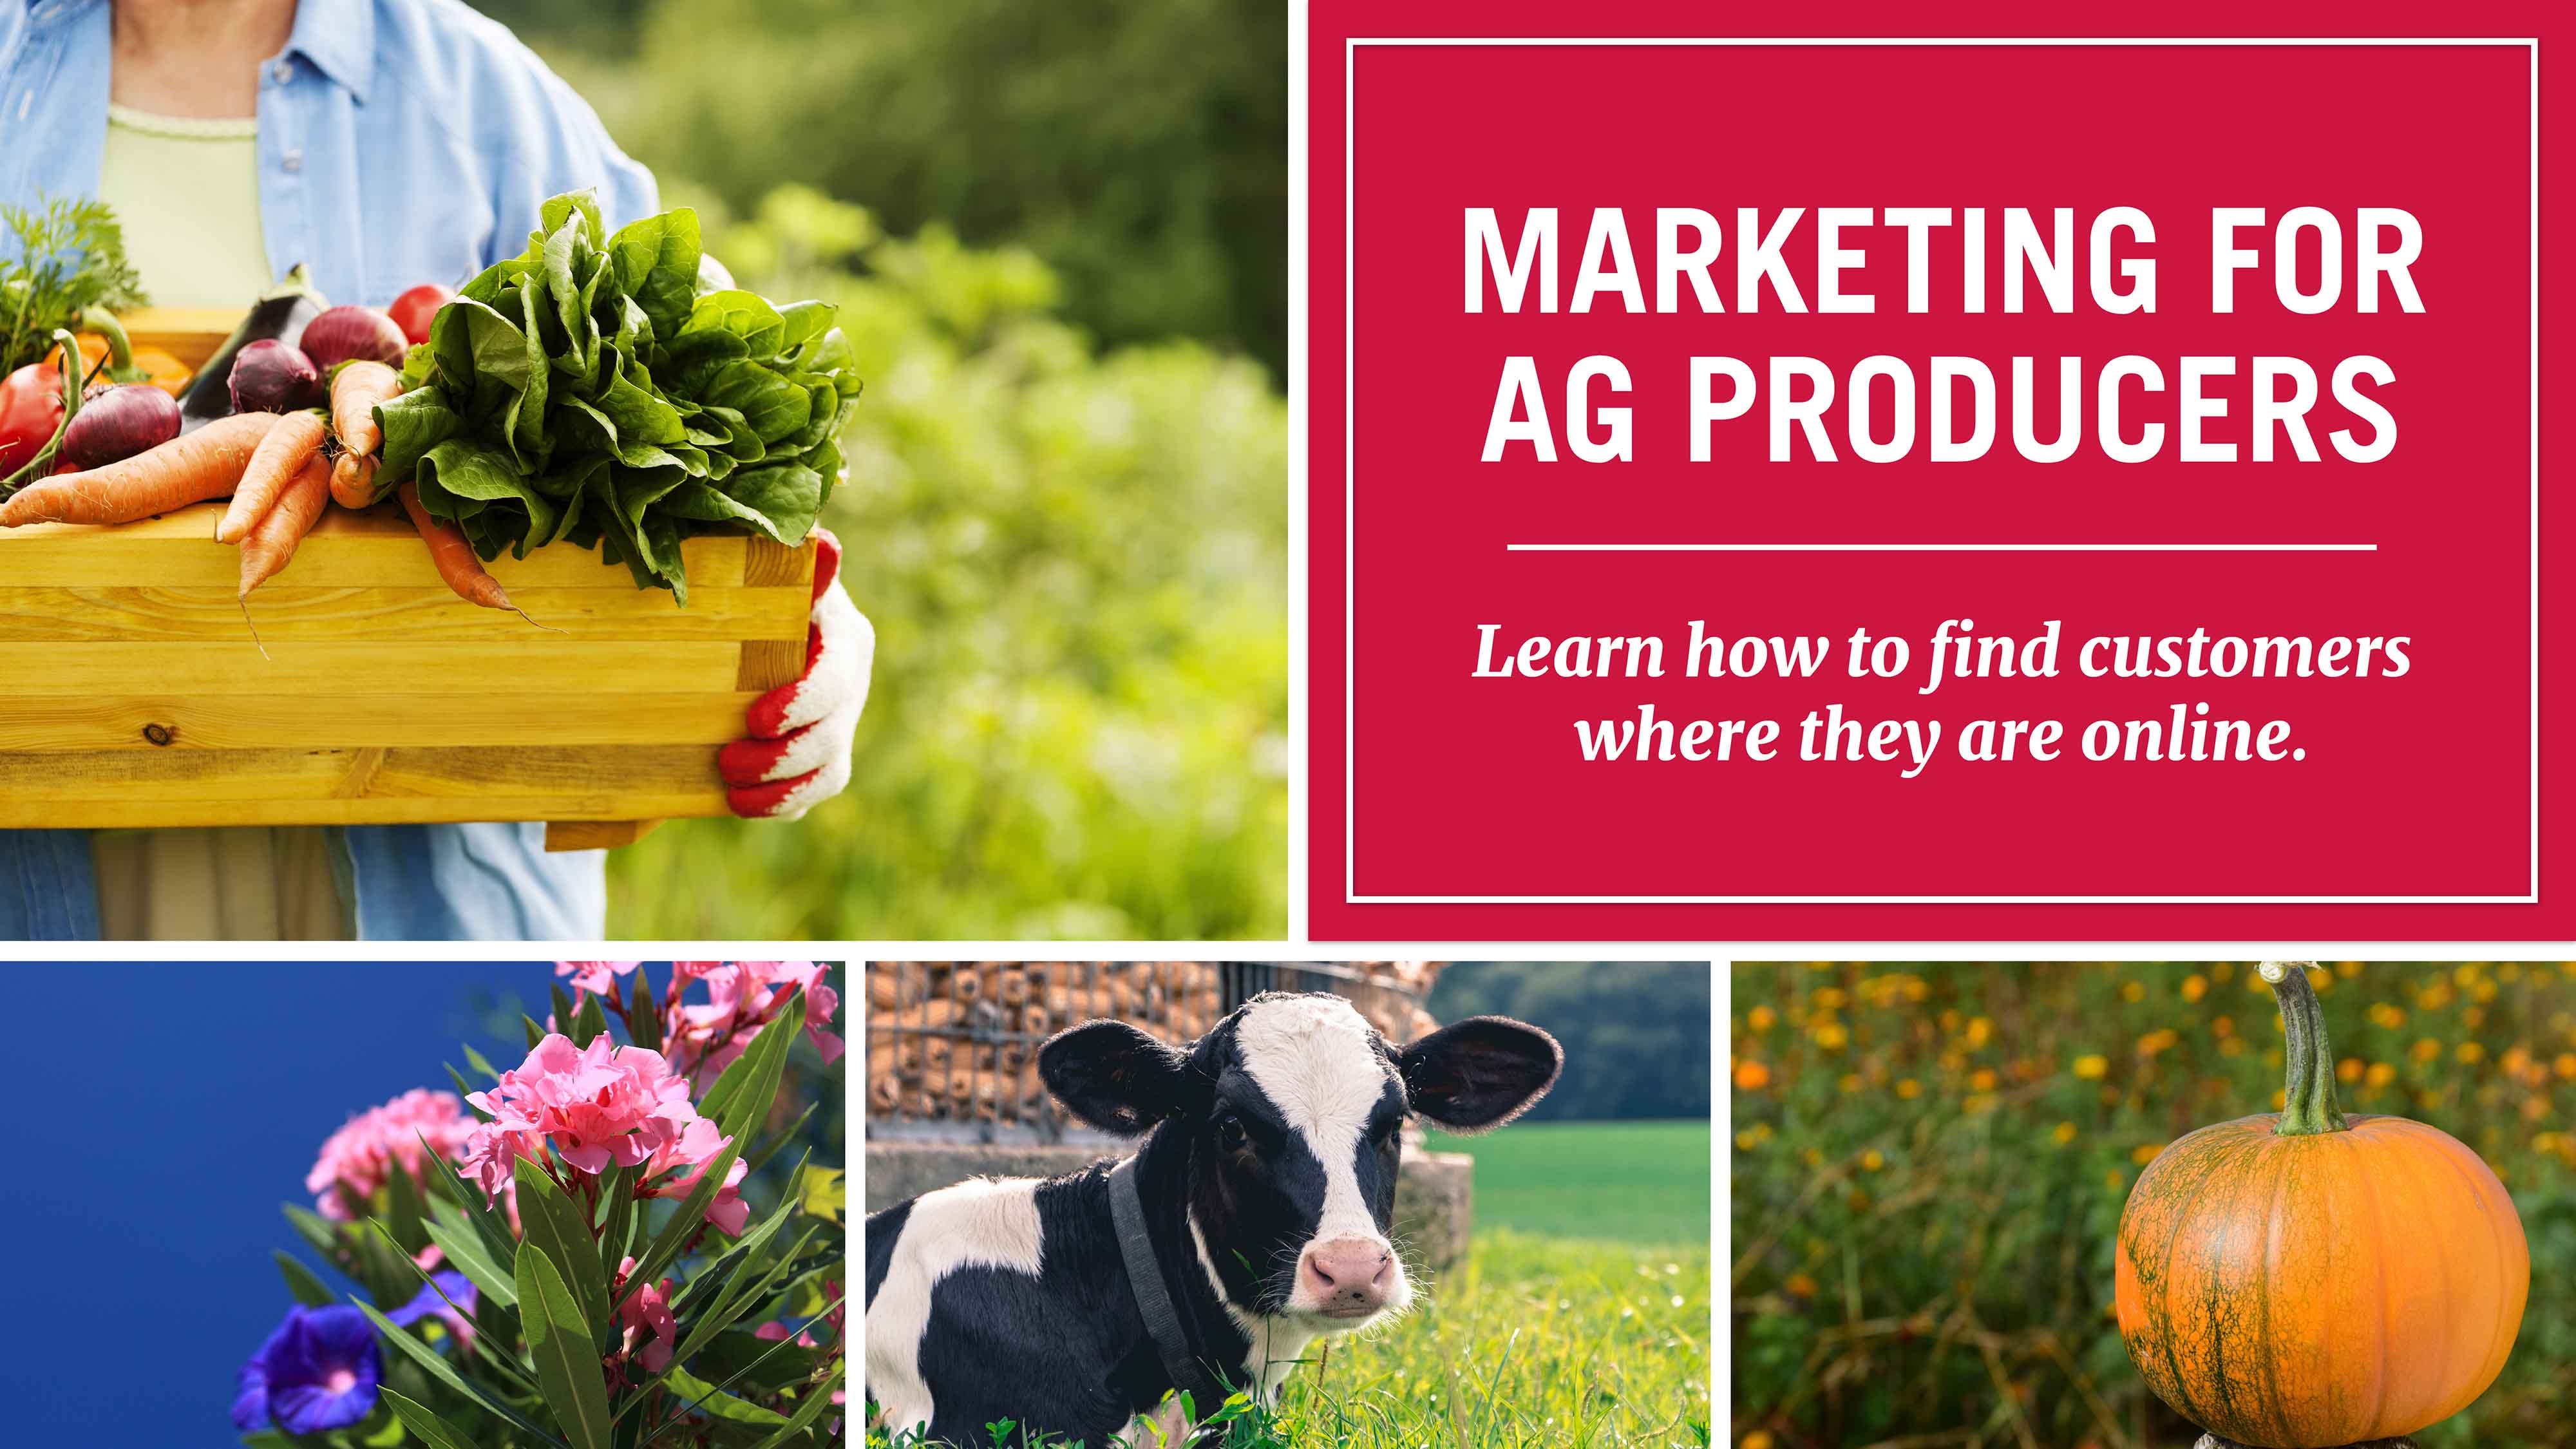 UGA Extension and UGA Small Business Development Center are teaming up to offer a four-part agricultural marketing webinar series beginning March 8.